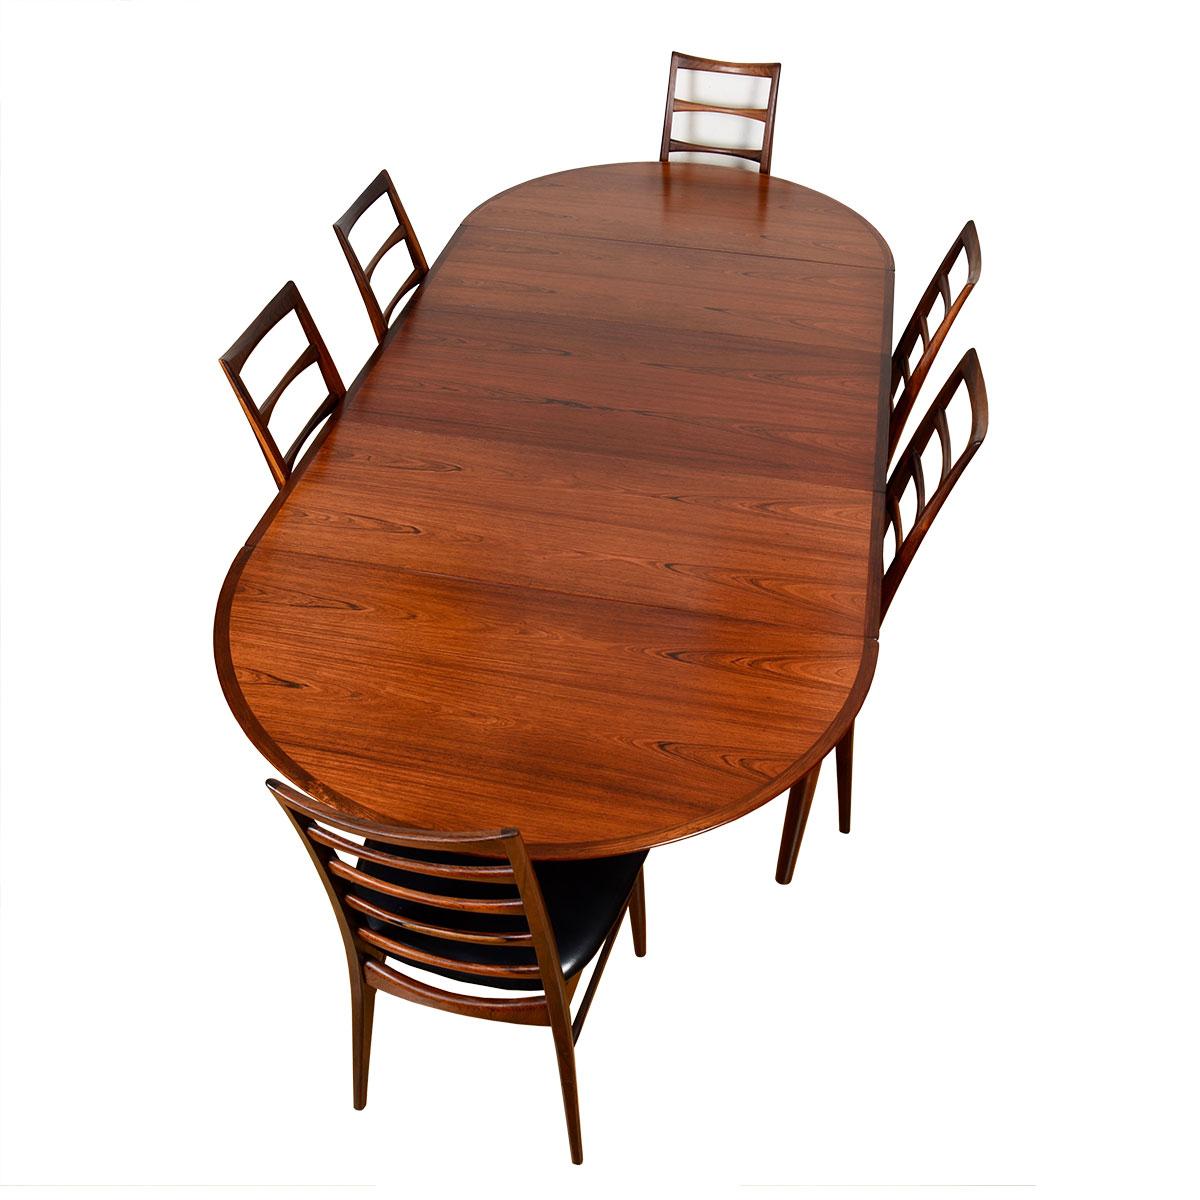 Vodder Danish Rosewood Dining Table with Removable Drop Leaves + Middle Leaf 2